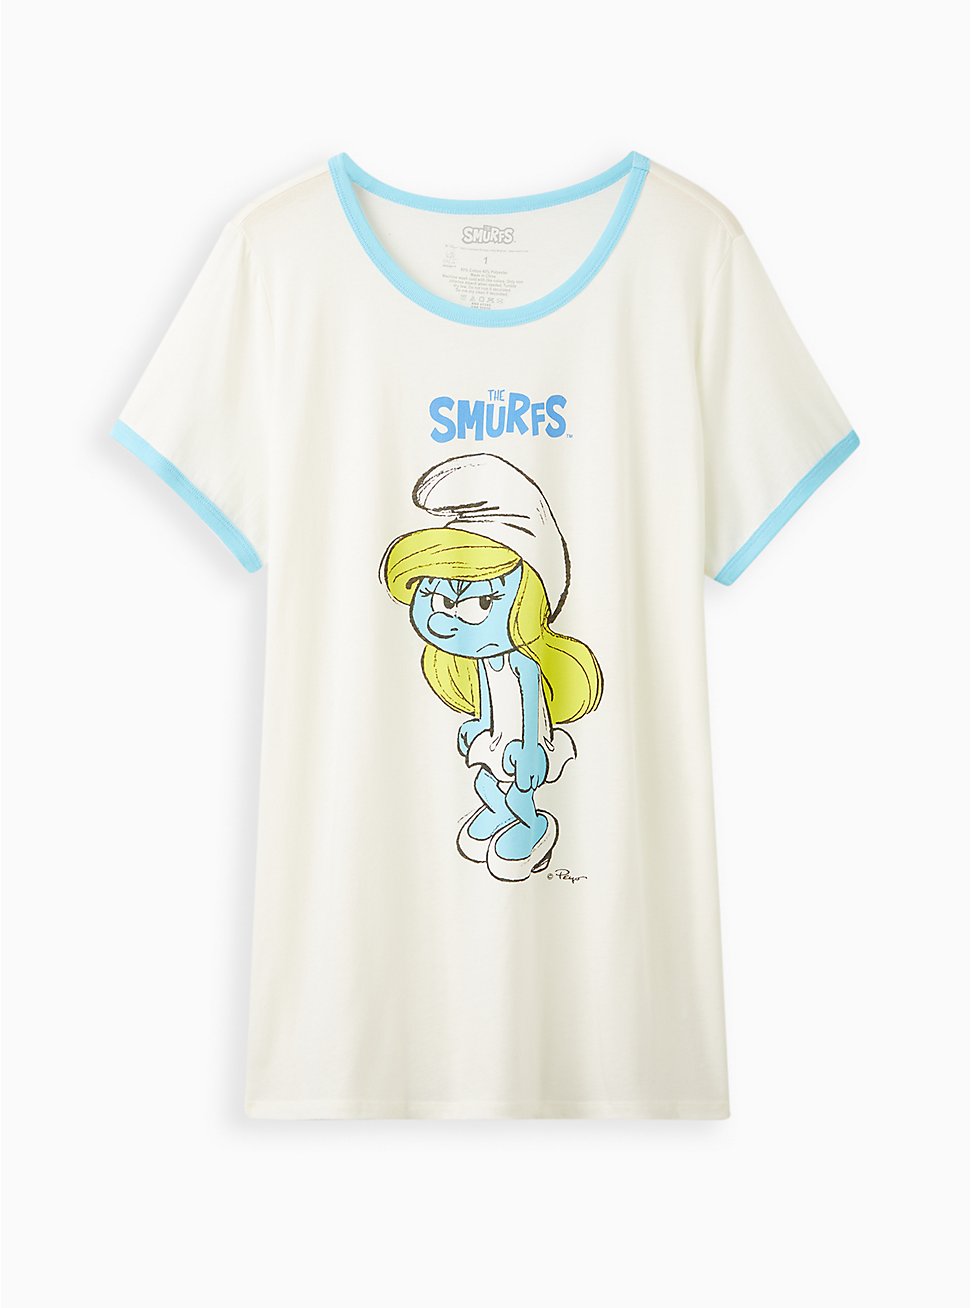 Plus Size Classic Fit Ringer Tee - The Smurfs Ivory, MARSHMALLOW, hi-res